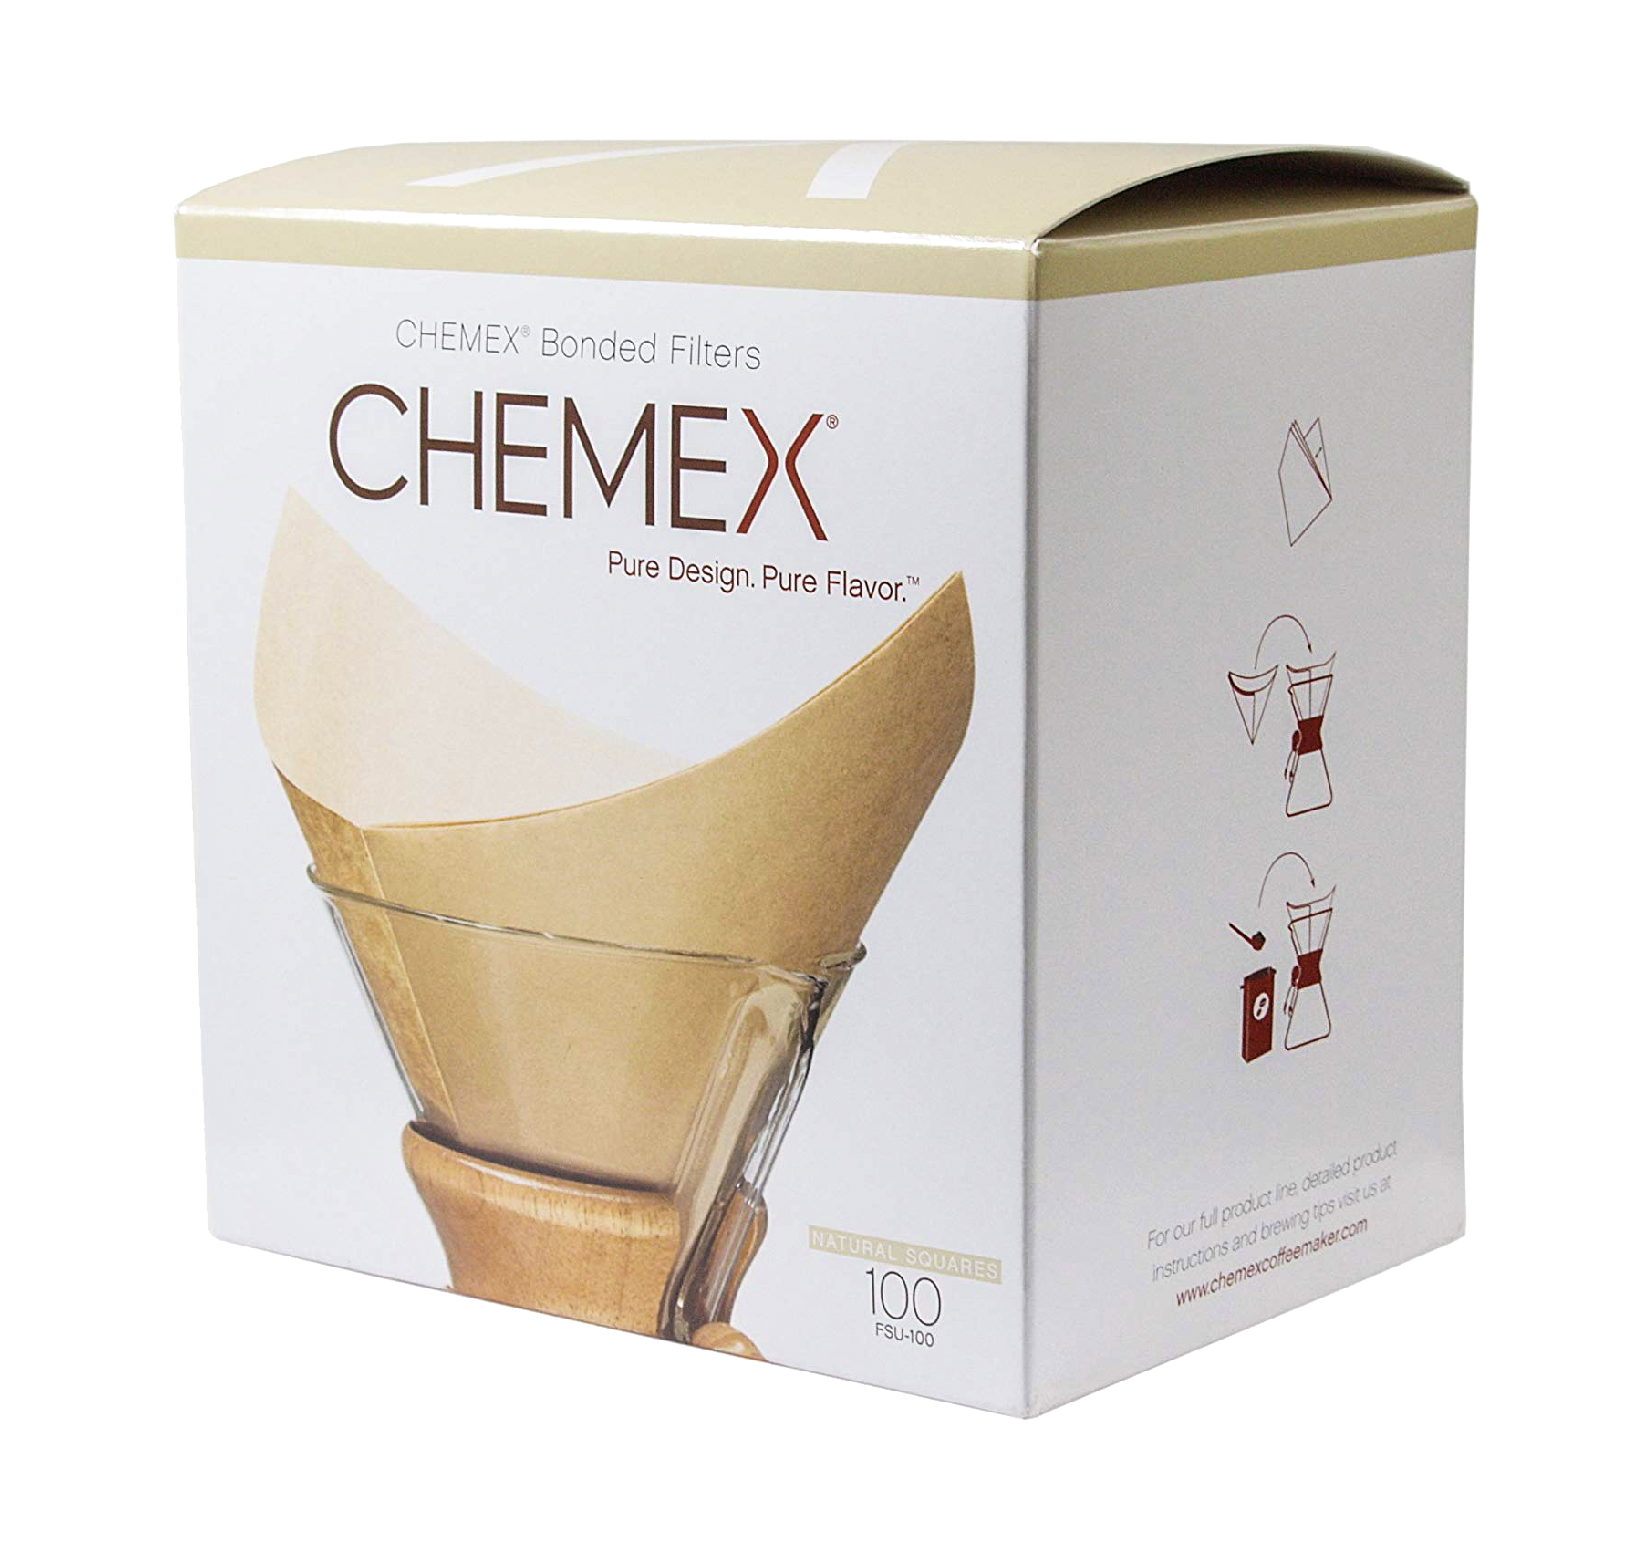 CHEMEX Natural Filters - Pre-folded